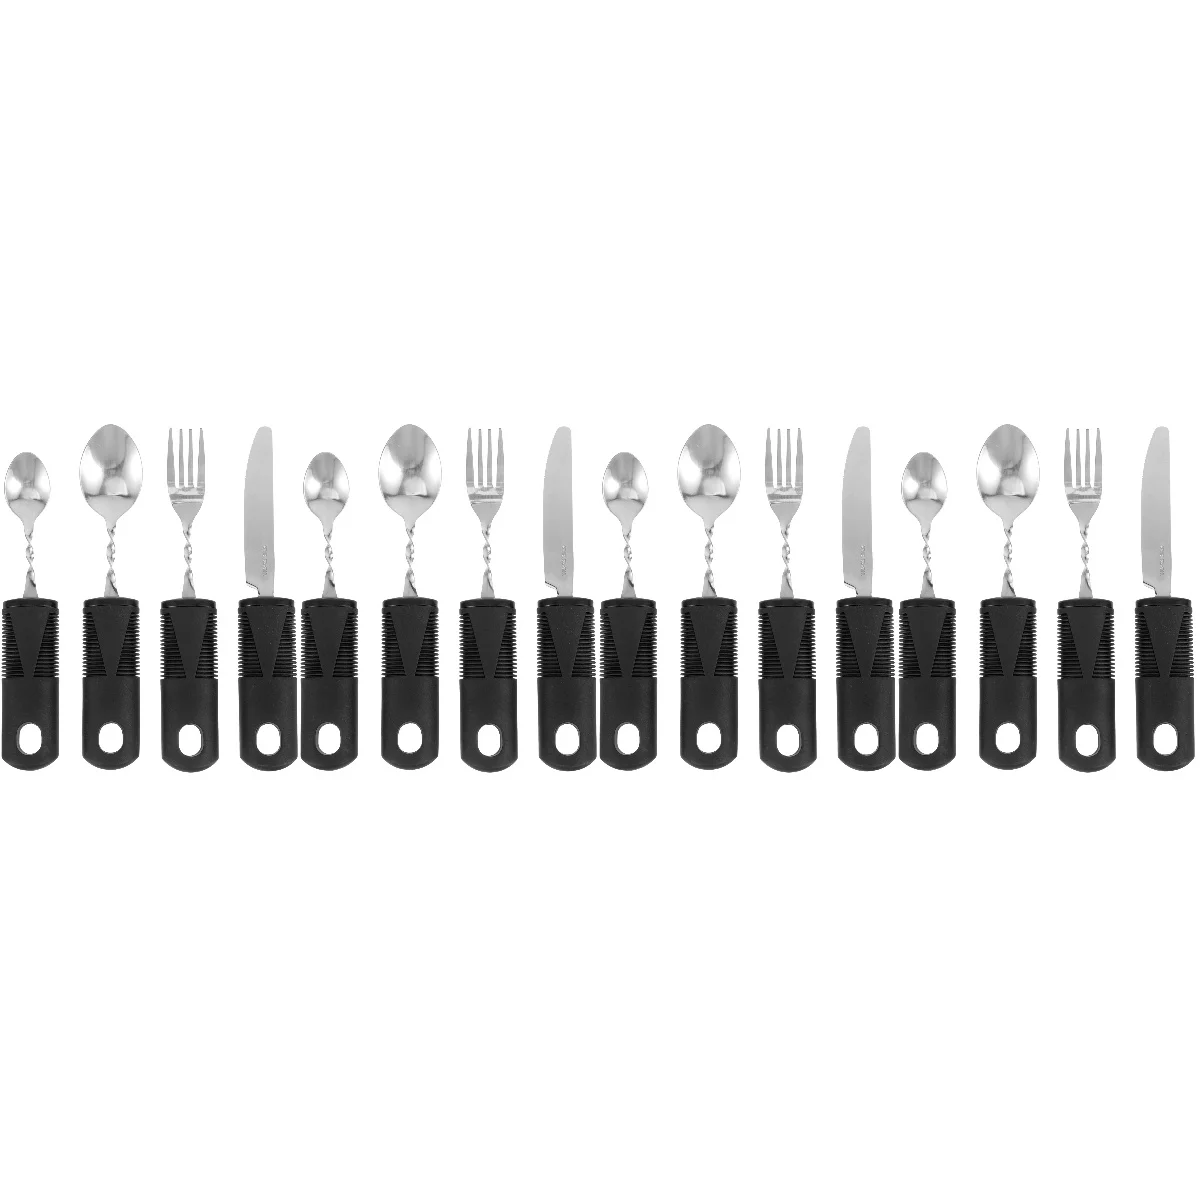 

16 Pcs Bendable Cutlery Adaptive Utensils Elderly Tools The Tableware Portable Forks Disabled Set Parkinsons